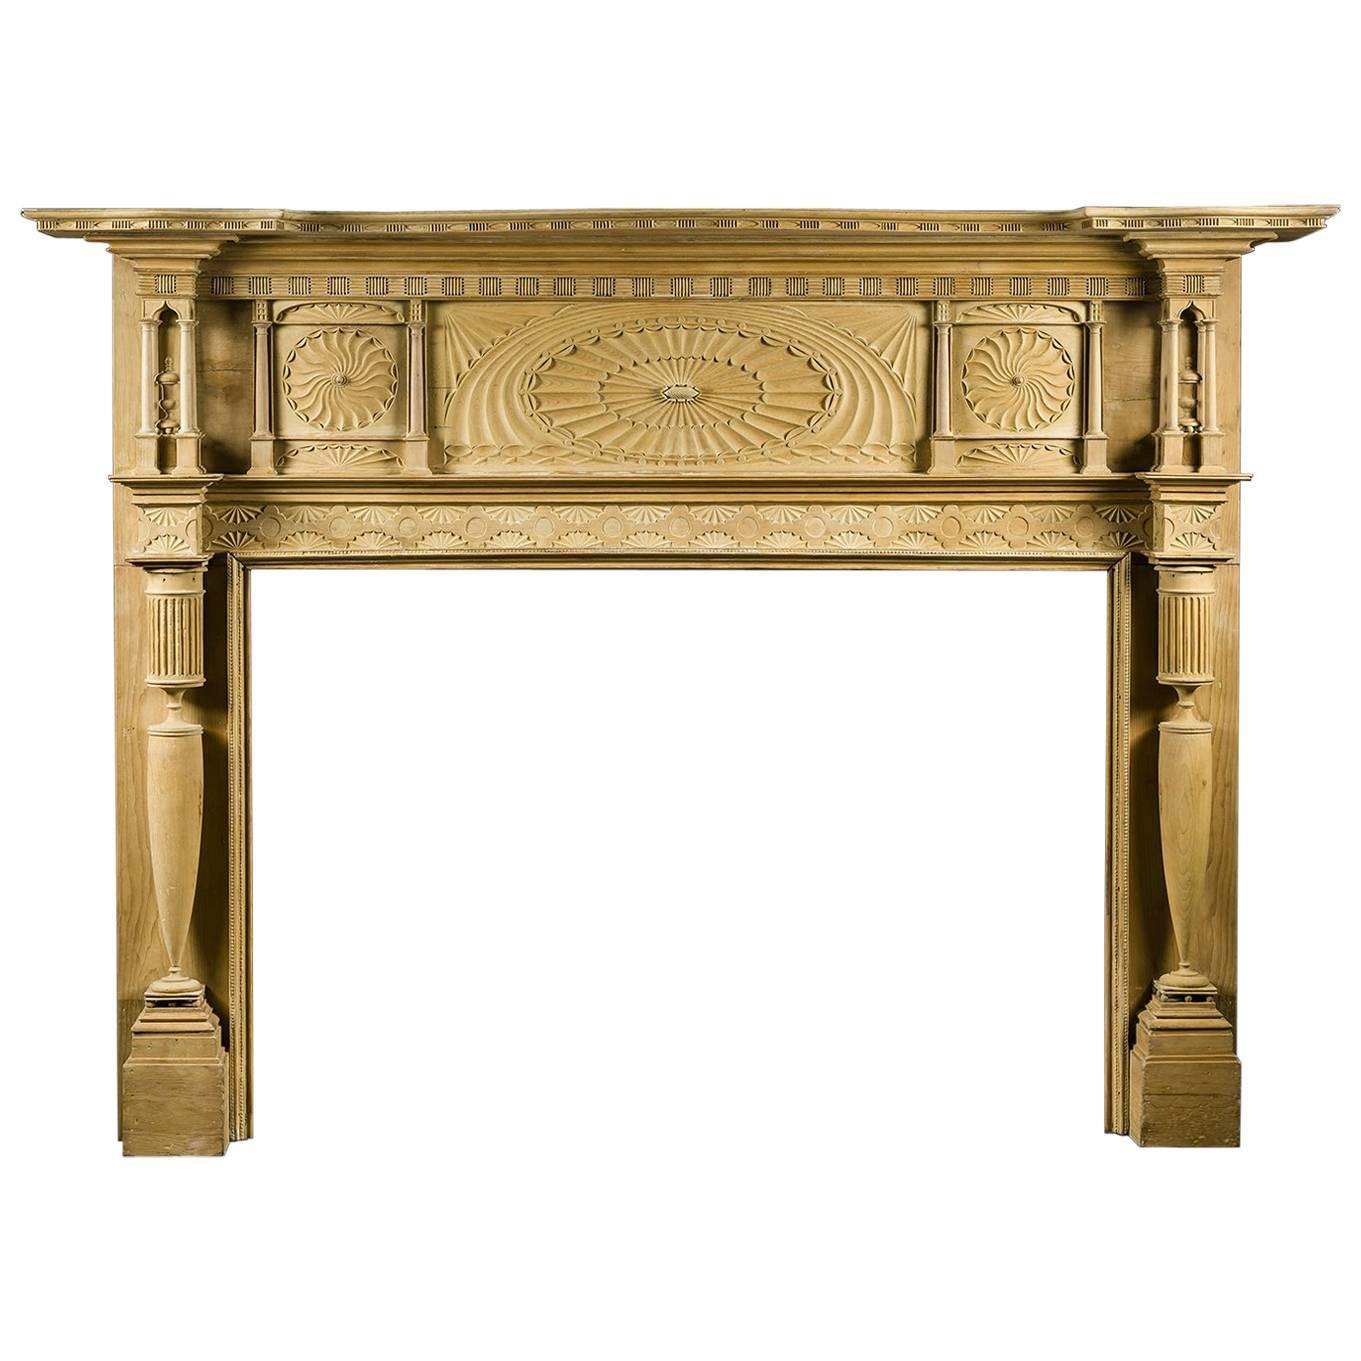 Fan-Carved Wood Mantel in the Federal Taste For Sale